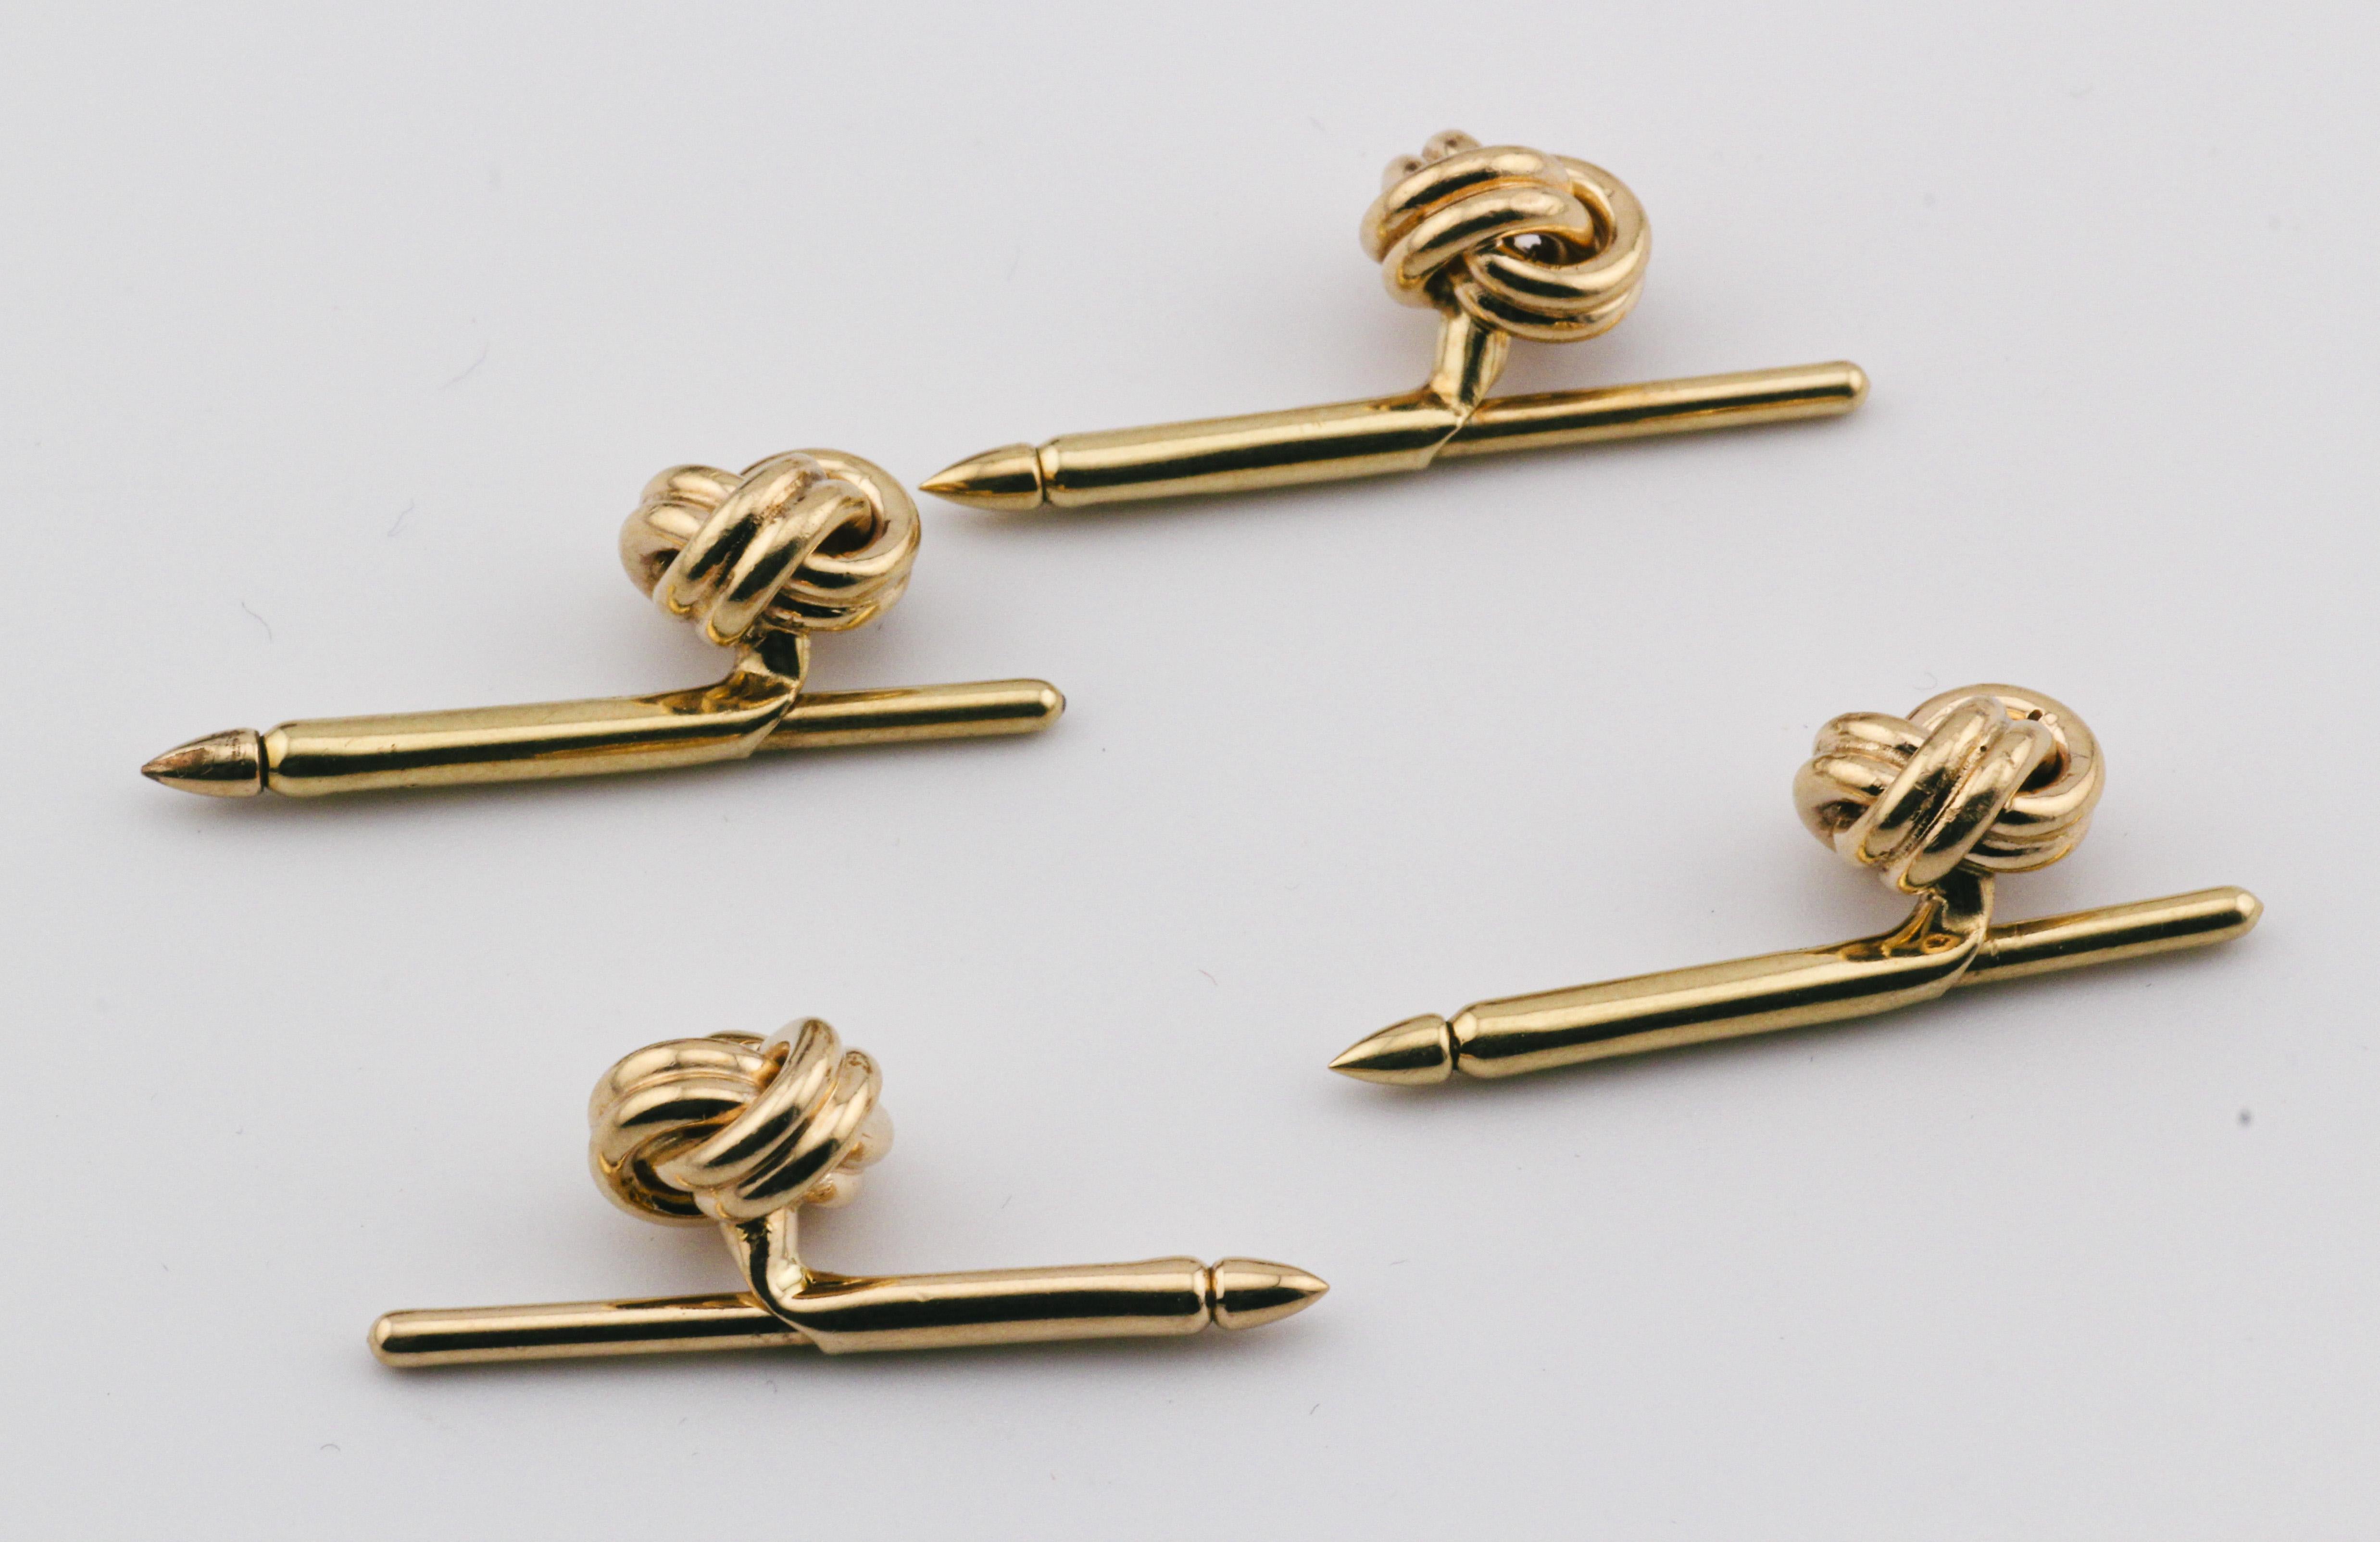 Tiffany & Co. 14K Yellow Gold Knot Cufflinks and 4 Studs Set In Good Condition For Sale In Bellmore, NY